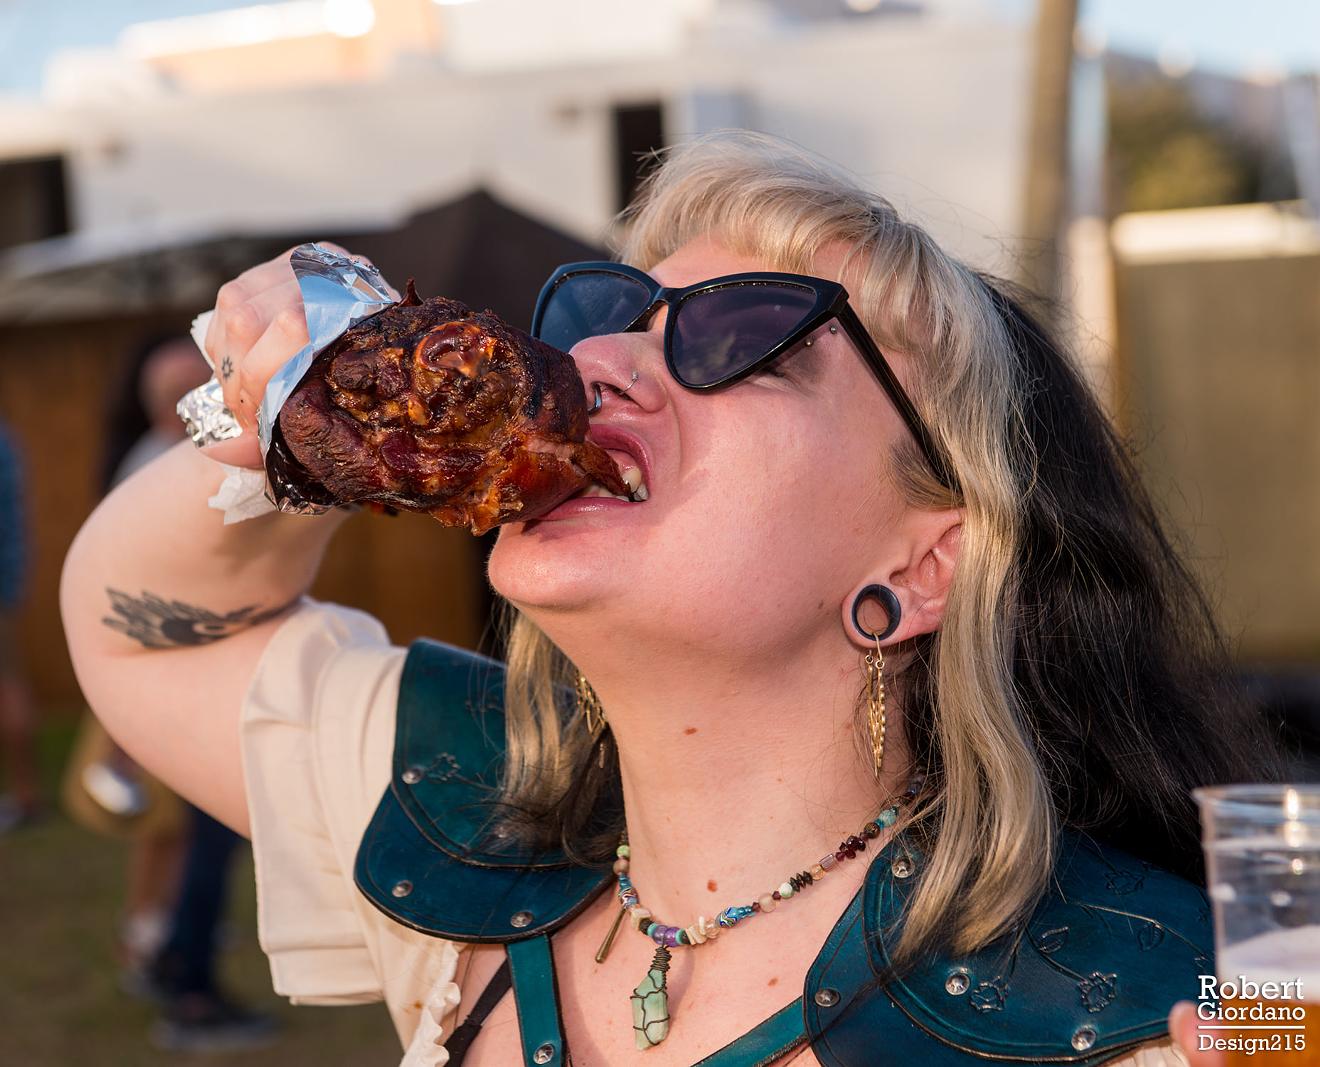 Is it really a renaissance festival without turkey legs?